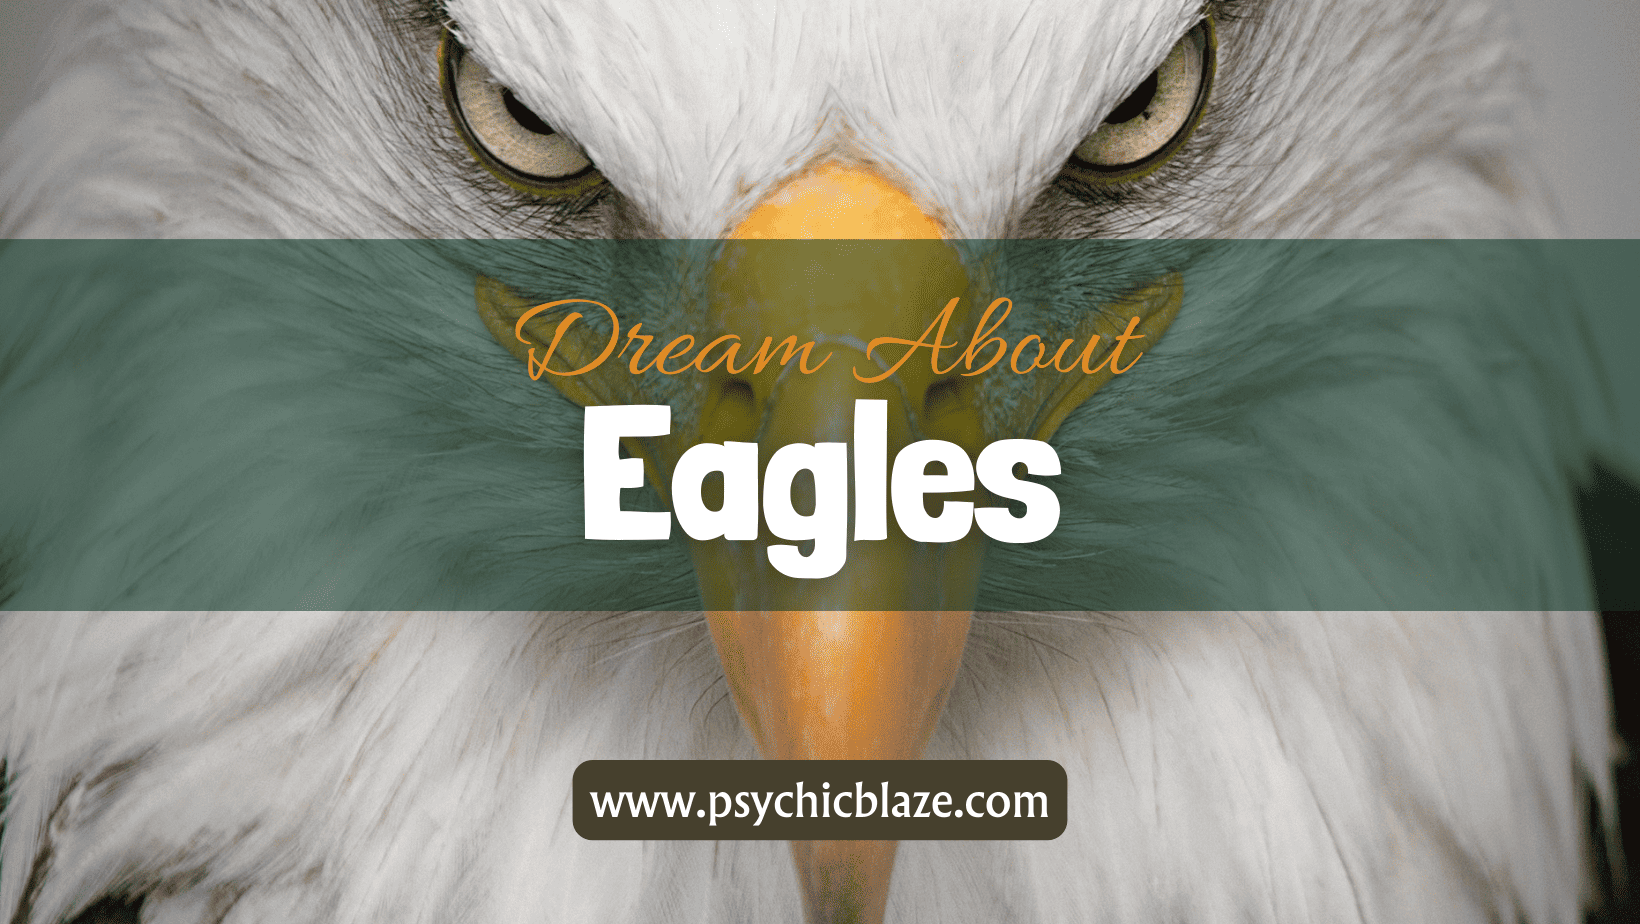 Dream about Eagles